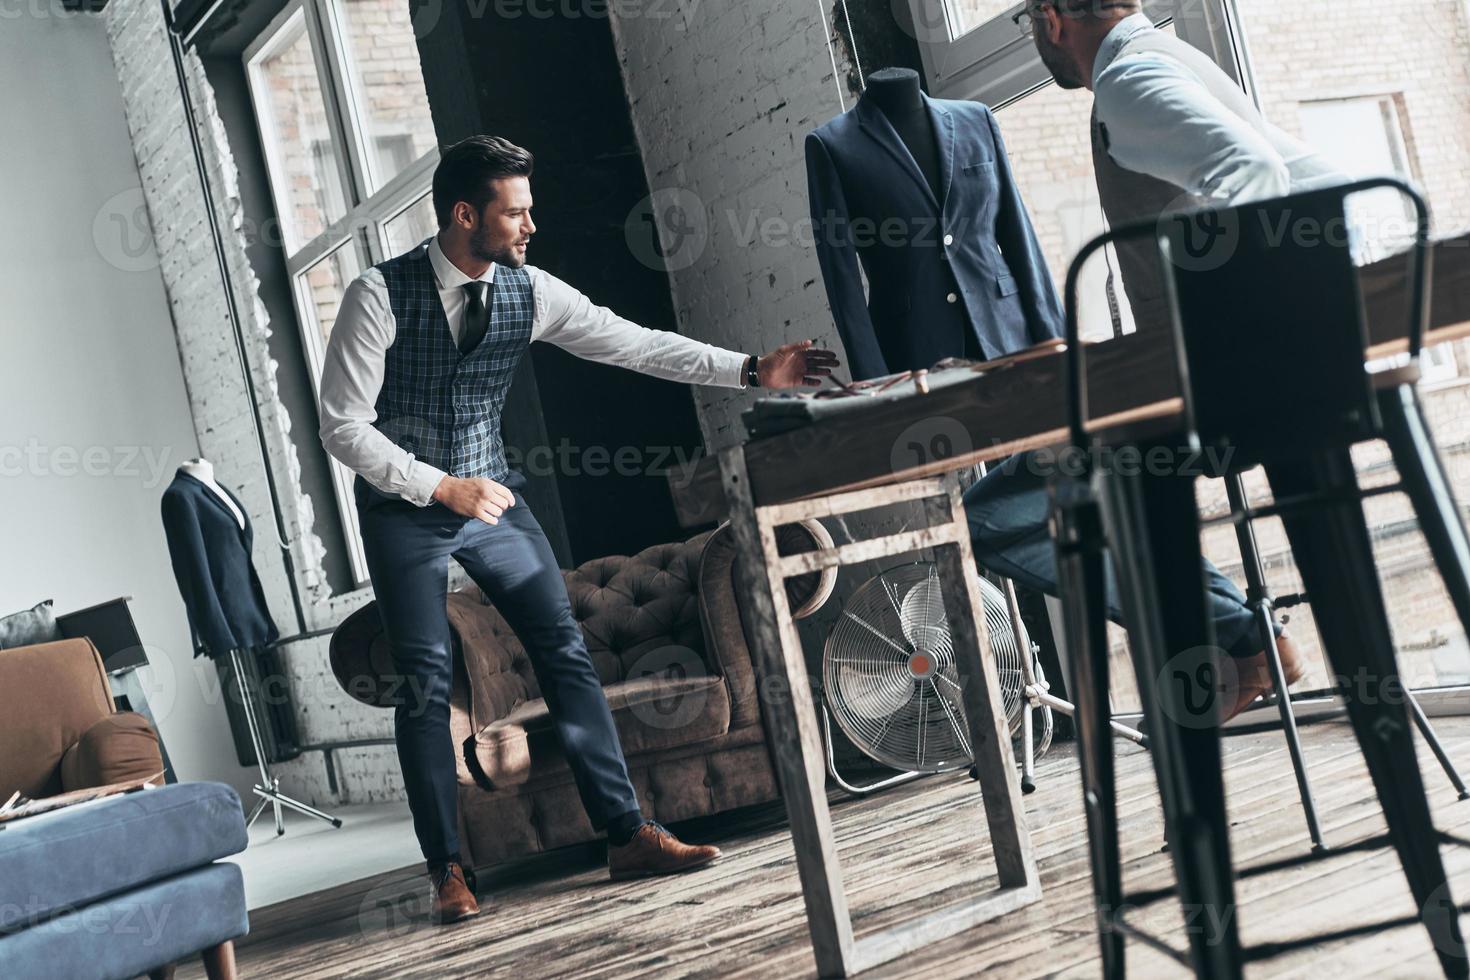 This is what I need. Two young fashionable men having a discussion while standing in workshop photo